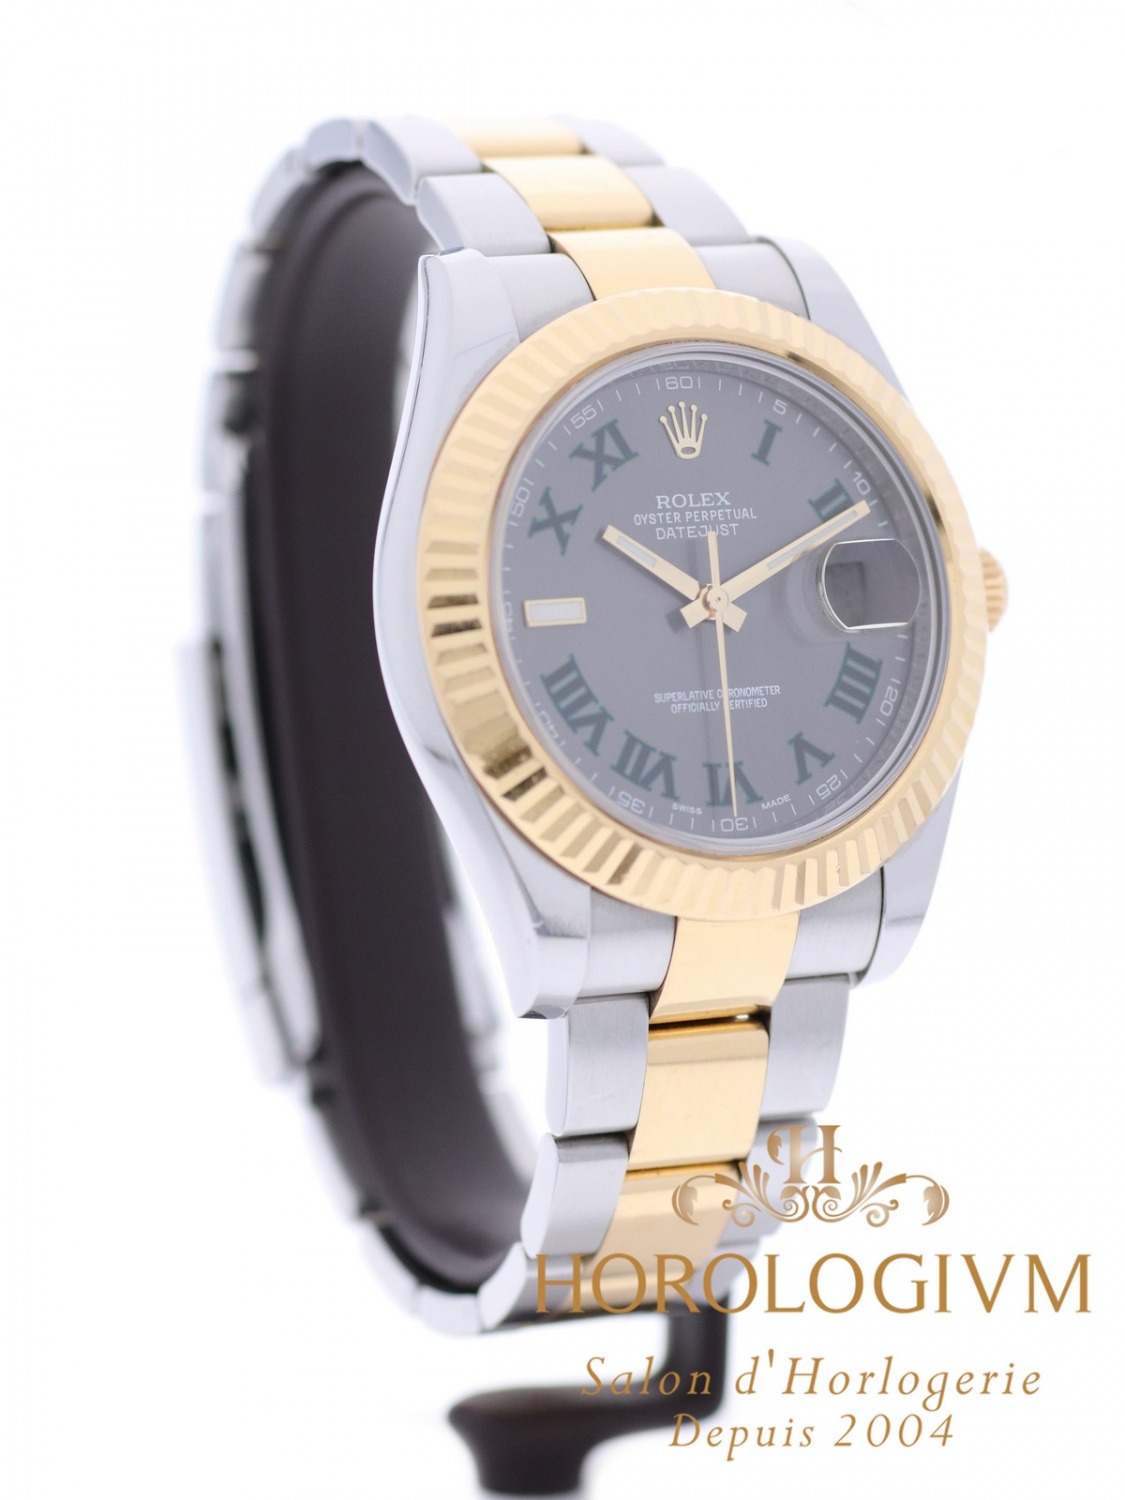 Rolex Datejust II Two-Tone 41 MM “Wimbledon Dial” watch, two-tone (bi-colored) silver and yellow gold